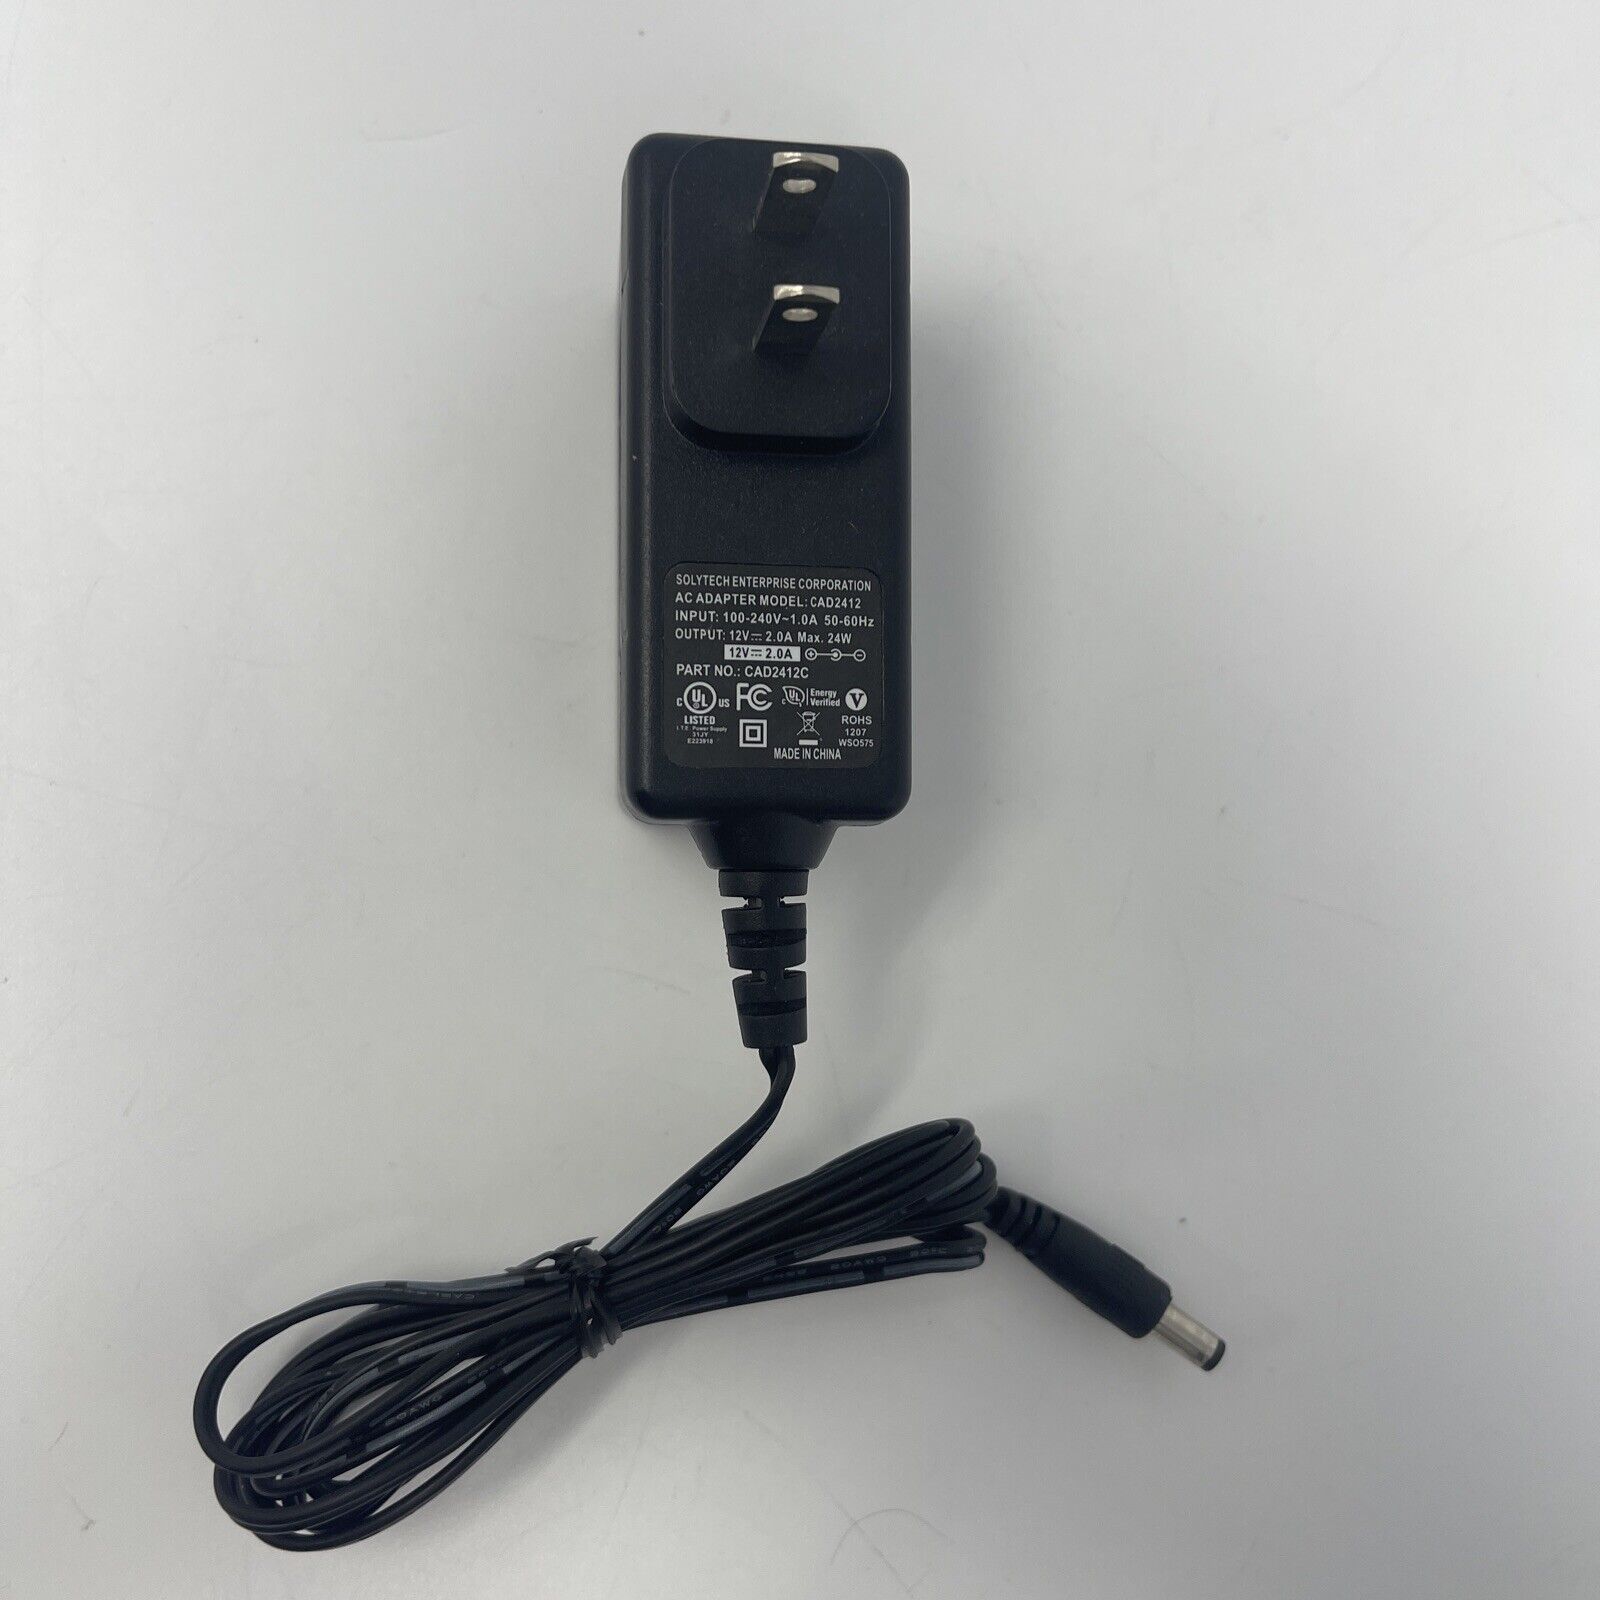 Solytech CAD2412 12V 2A 2.0A 2000mA Power Supply AC Adapter Charger Cable Brand: Solytech Type: AC/DC Adapter Conn